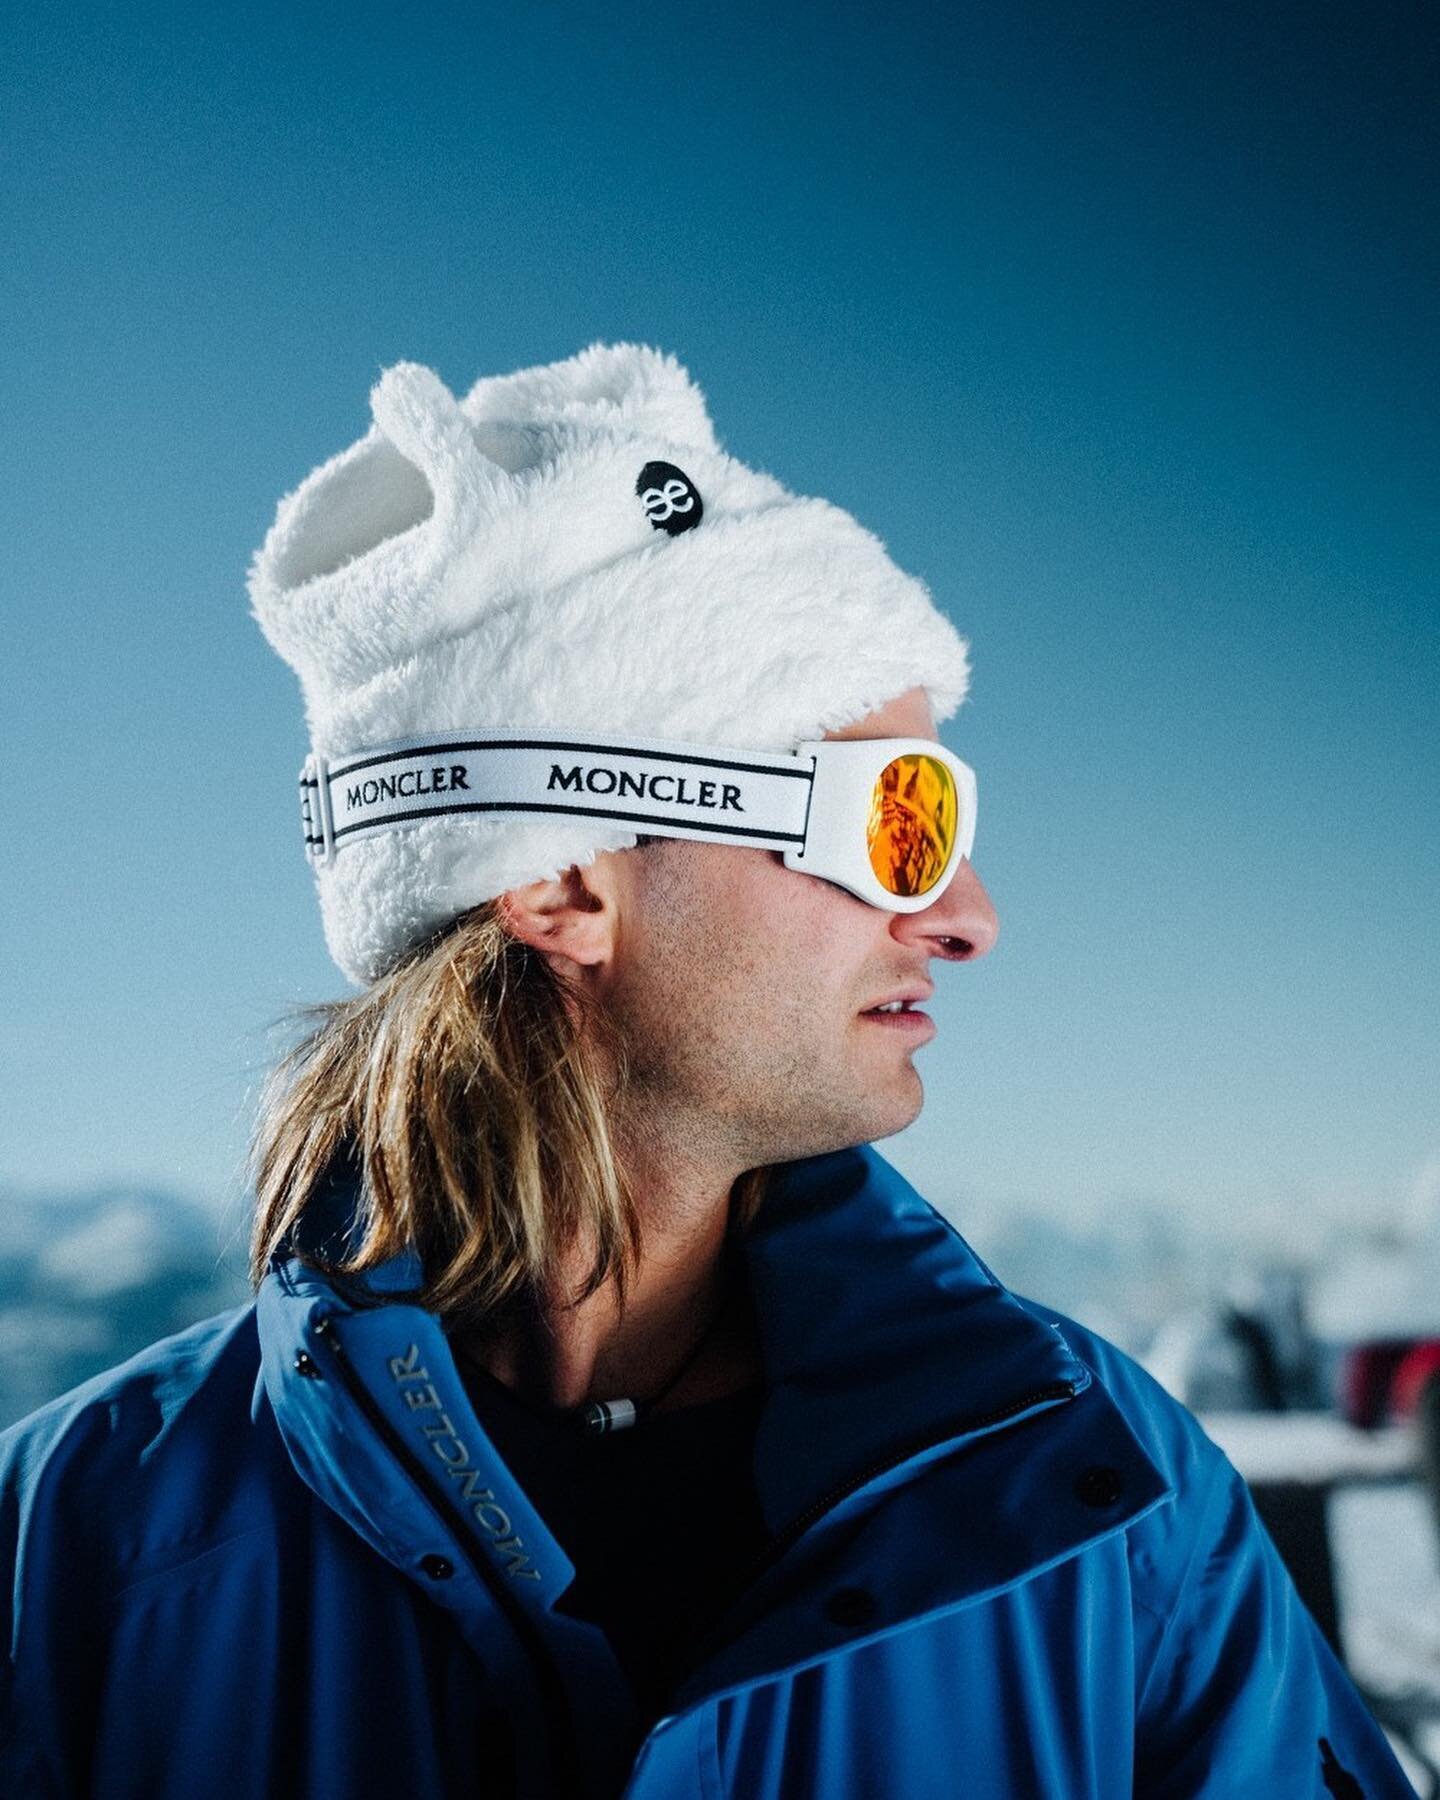 In partnership with snowboarder and singer @patburgener, WABS introduced a one-of-a-kind concept to promote Moncler&rsquo;s iconic pop-up store at Chetzeron hotel, Crans-Montana🇨🇭 

The collaboration brought forth a unique approach to promoting thi